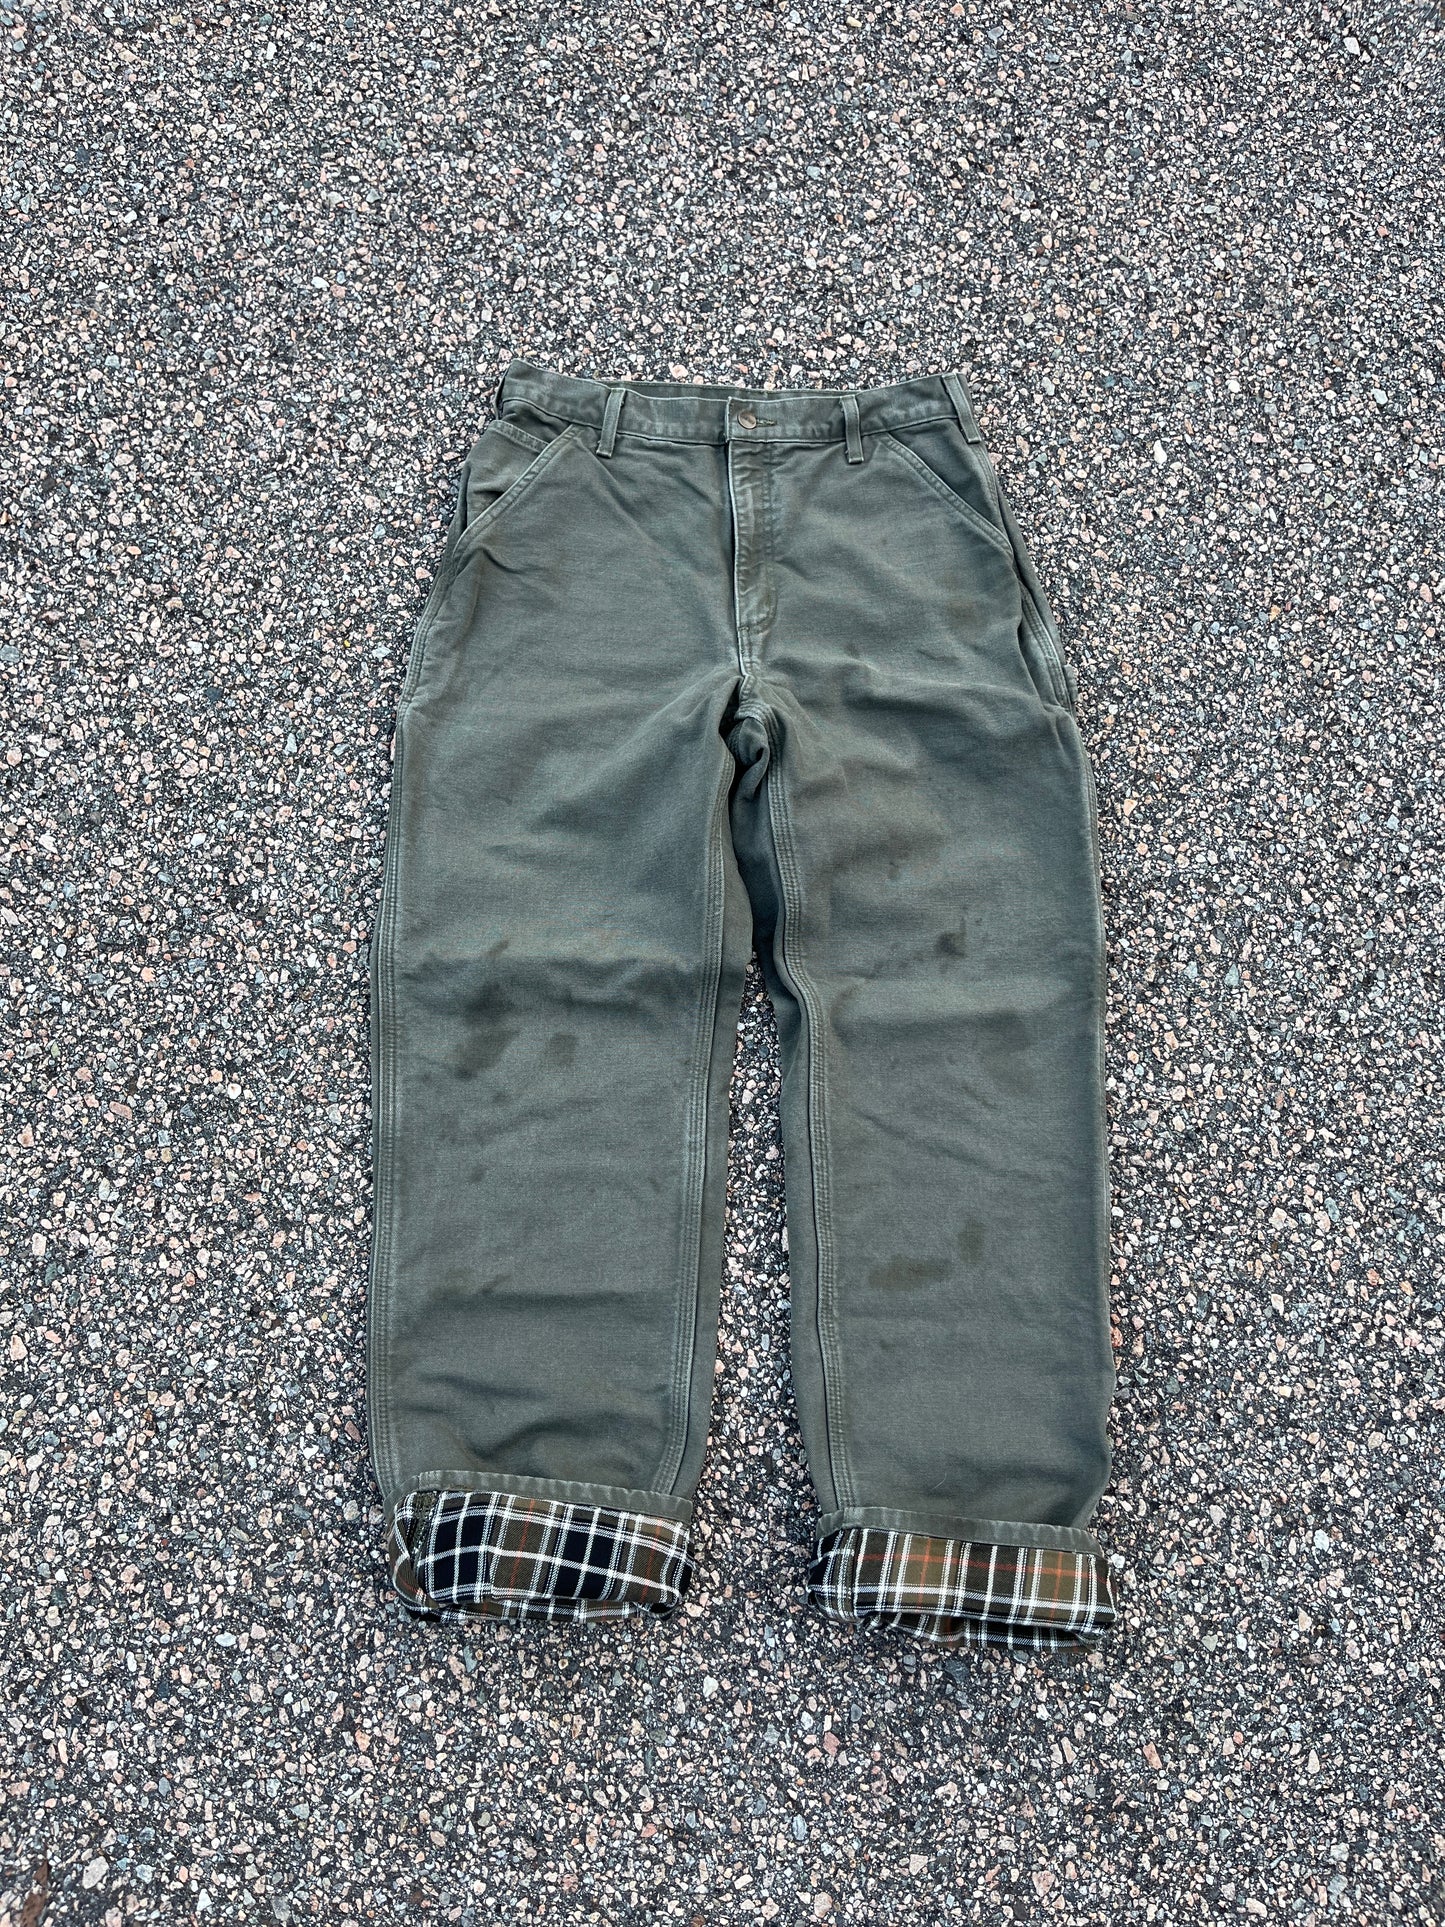 Faded Olive Green Carhartt Blanket Lined Carpenter Pants - 31 x 32